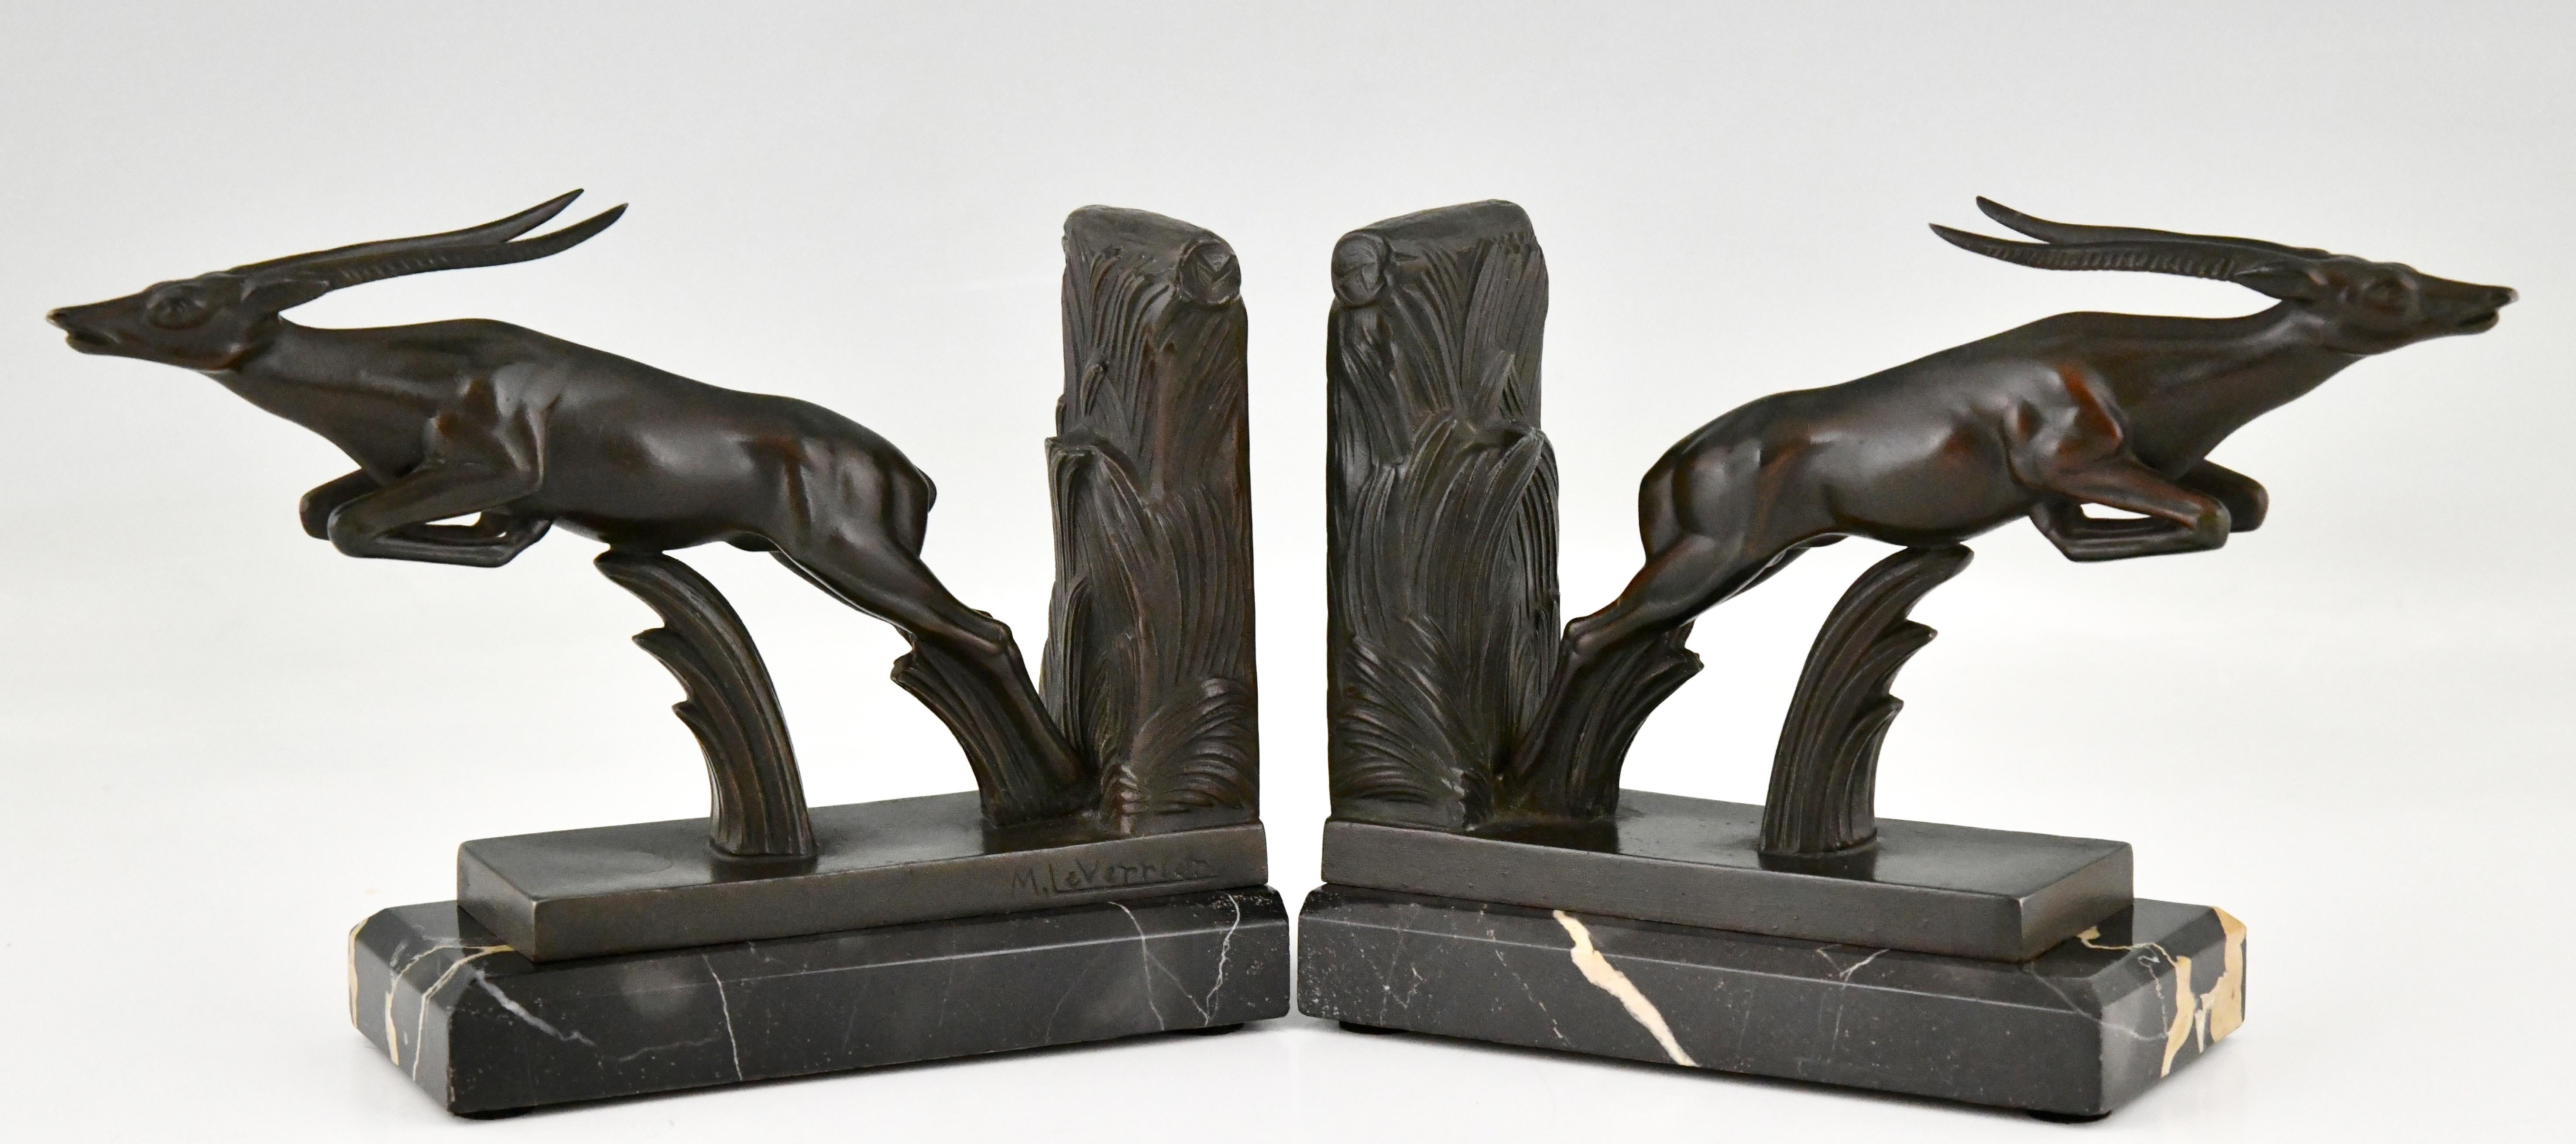 Art Deco leaping deer bookends by Max Le Verrier. 
The sculptures are executed in patinated metal and mounted on Portor marble bases. 
France 1930.